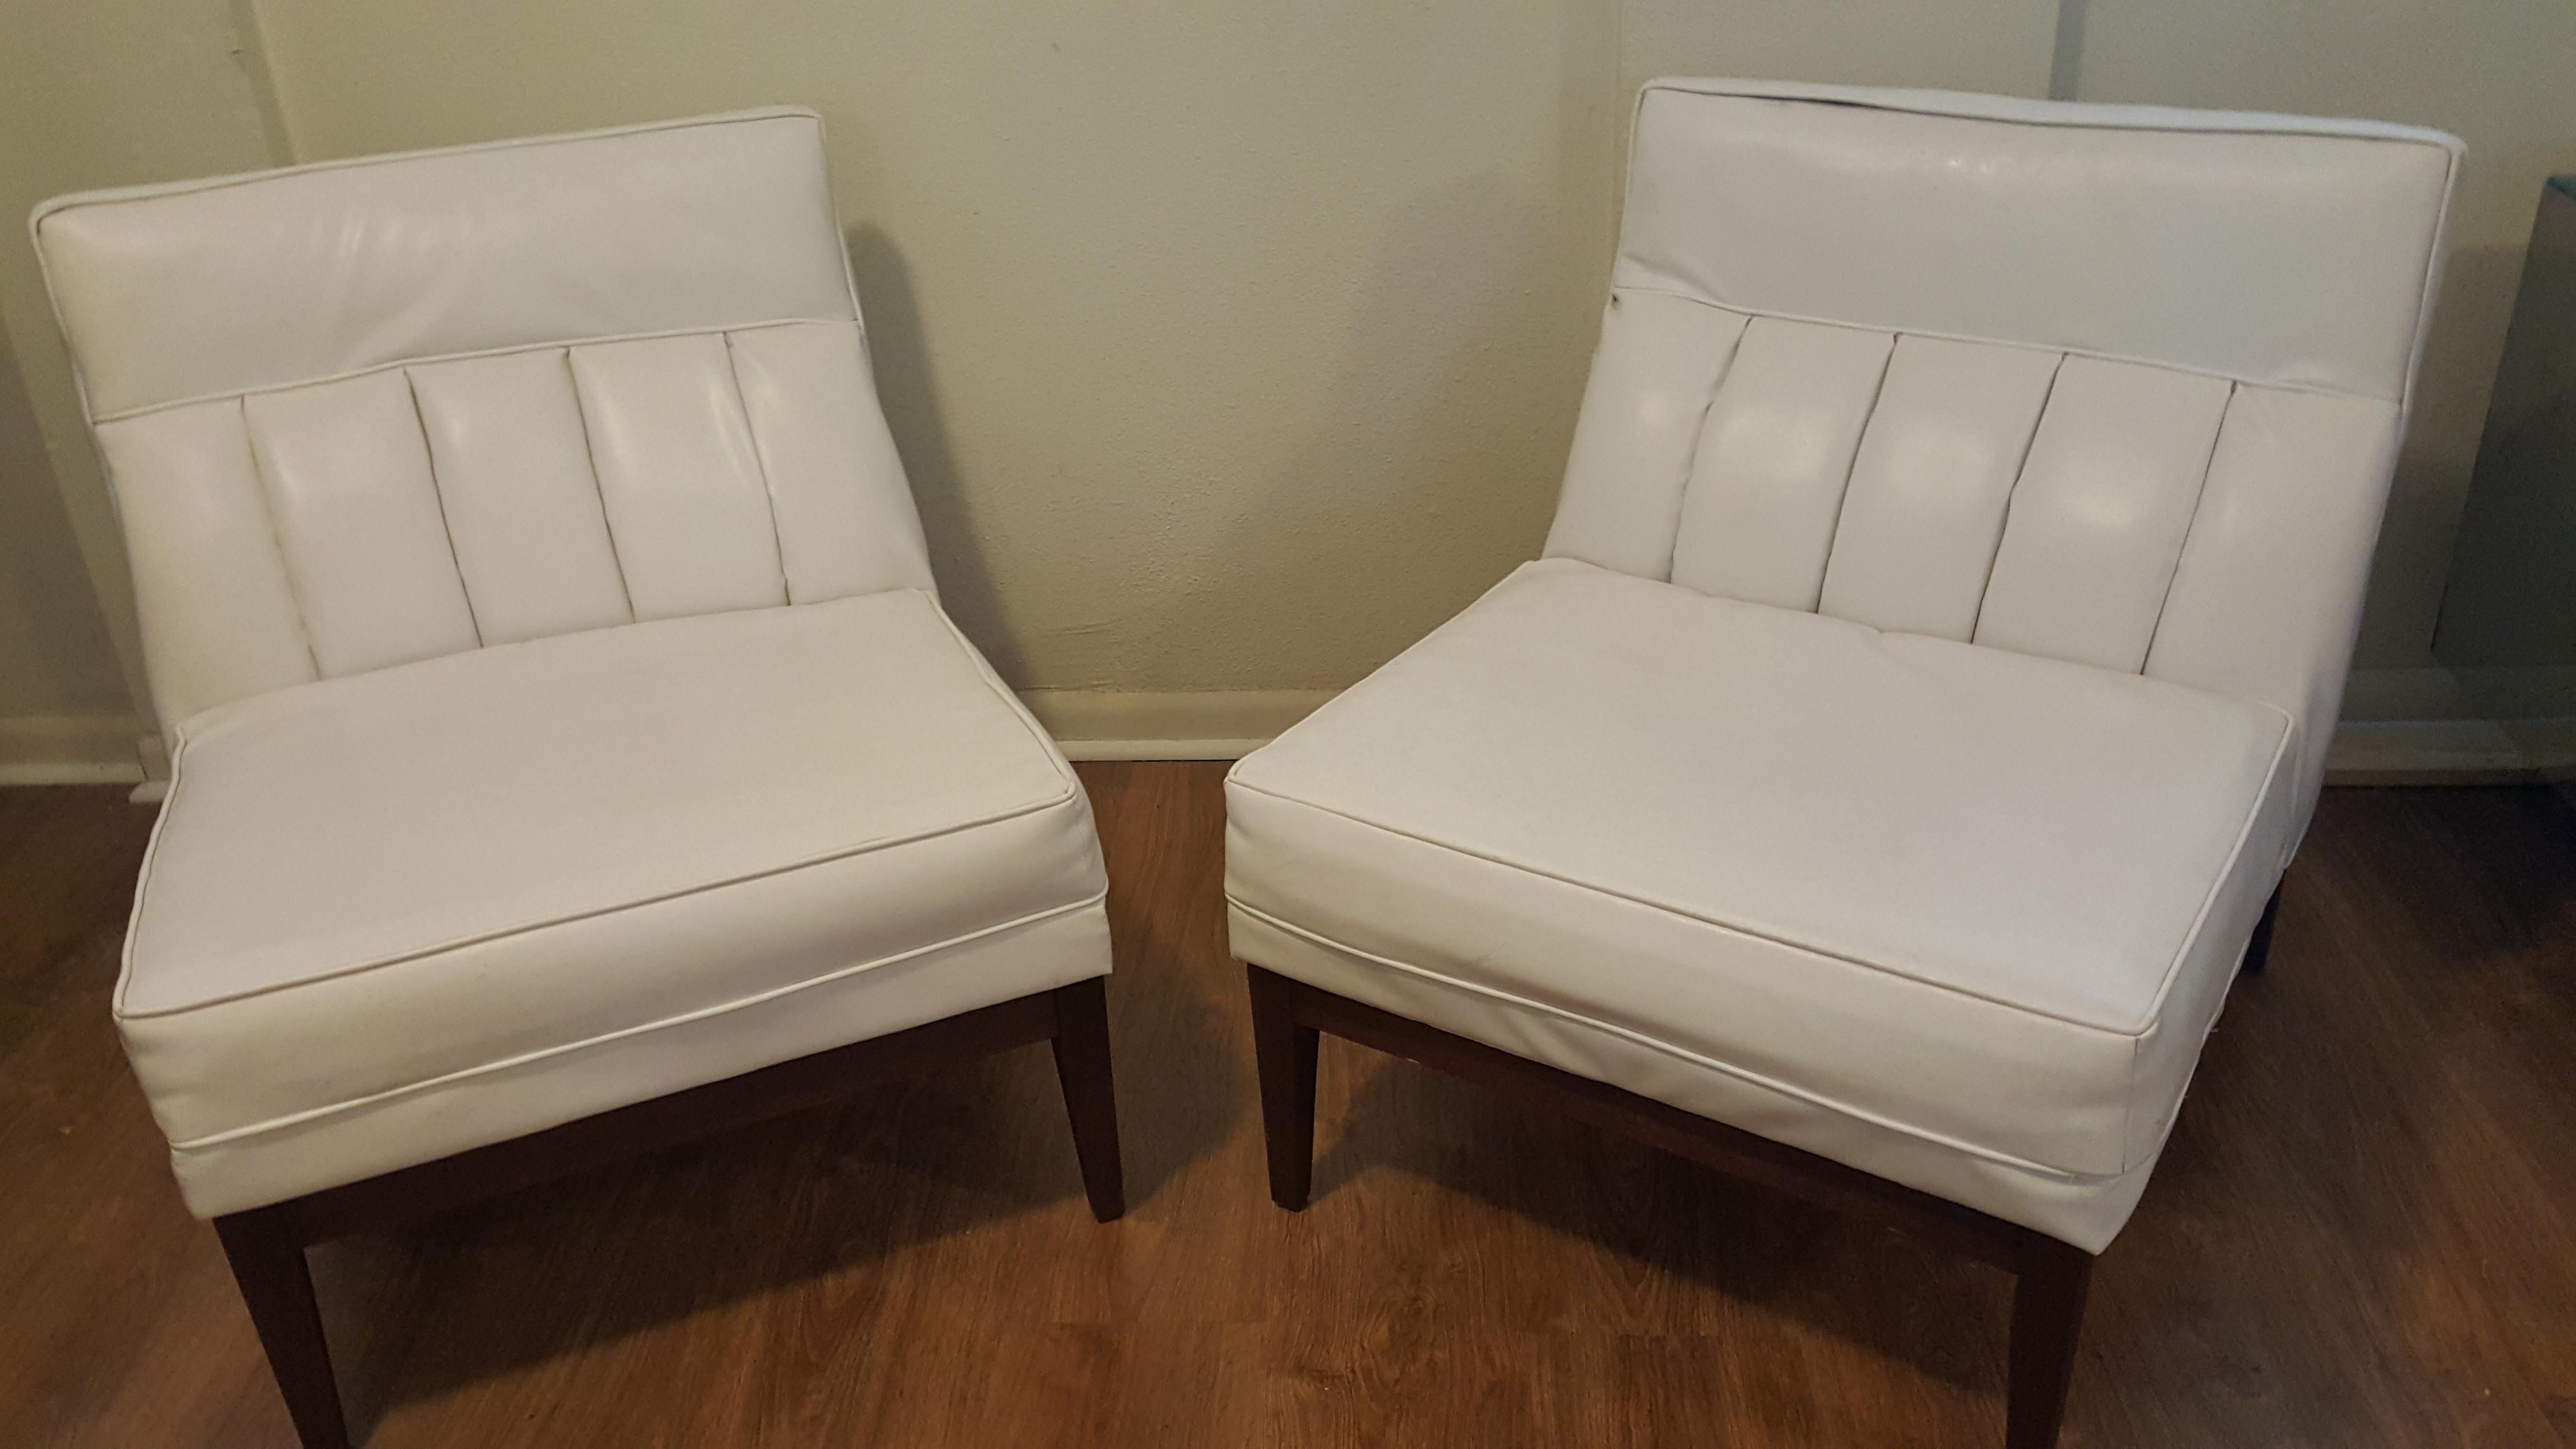 Pair of Midcentury Armless Slipper Chairs For Sale 1